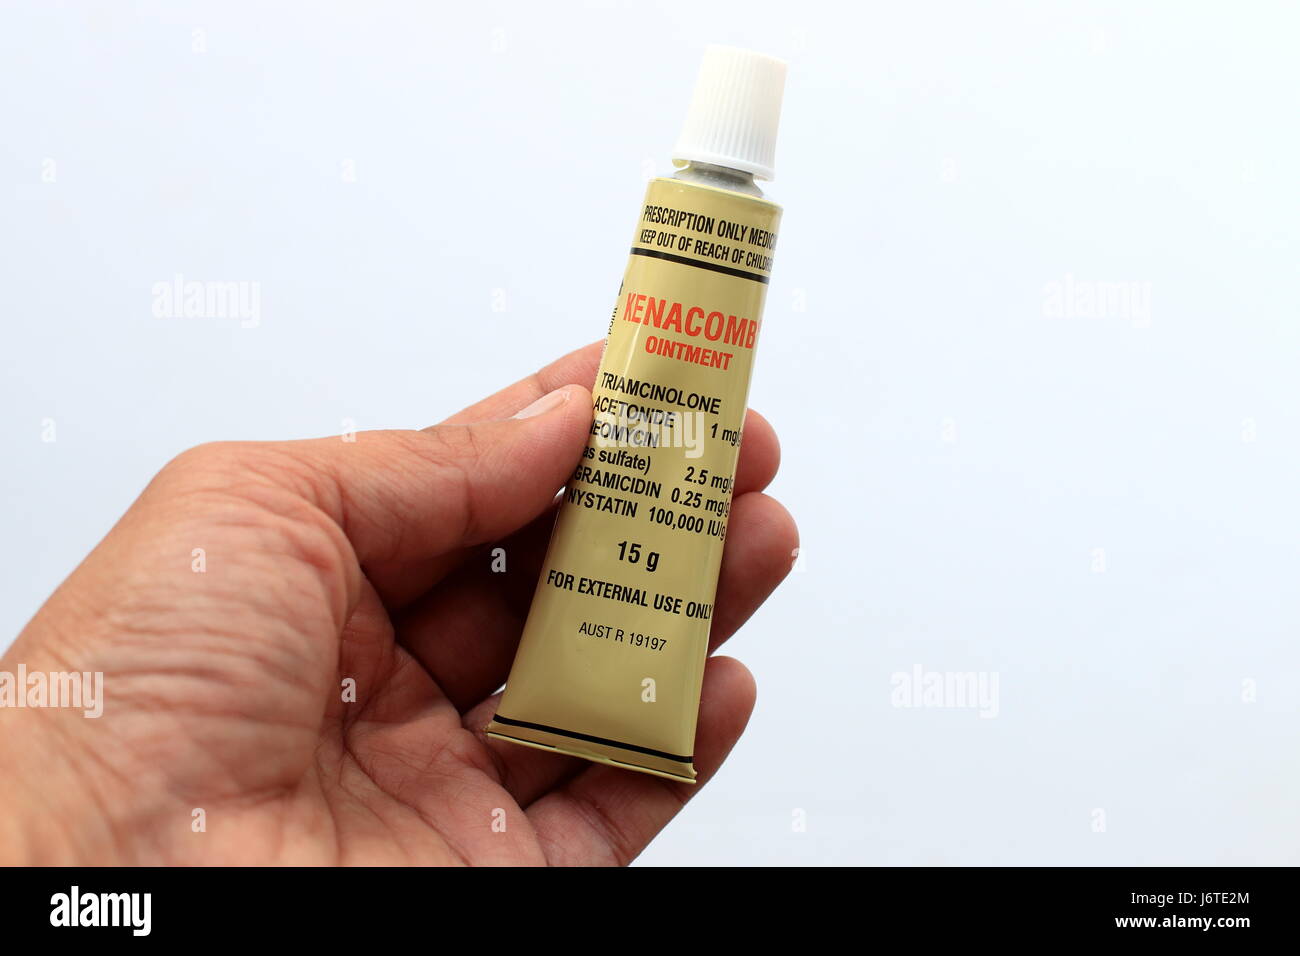 NOT AN ACTUAL MEDICATION, STOCK Photo Only! Kenacomb Ointment isolated against white background Stock Photo